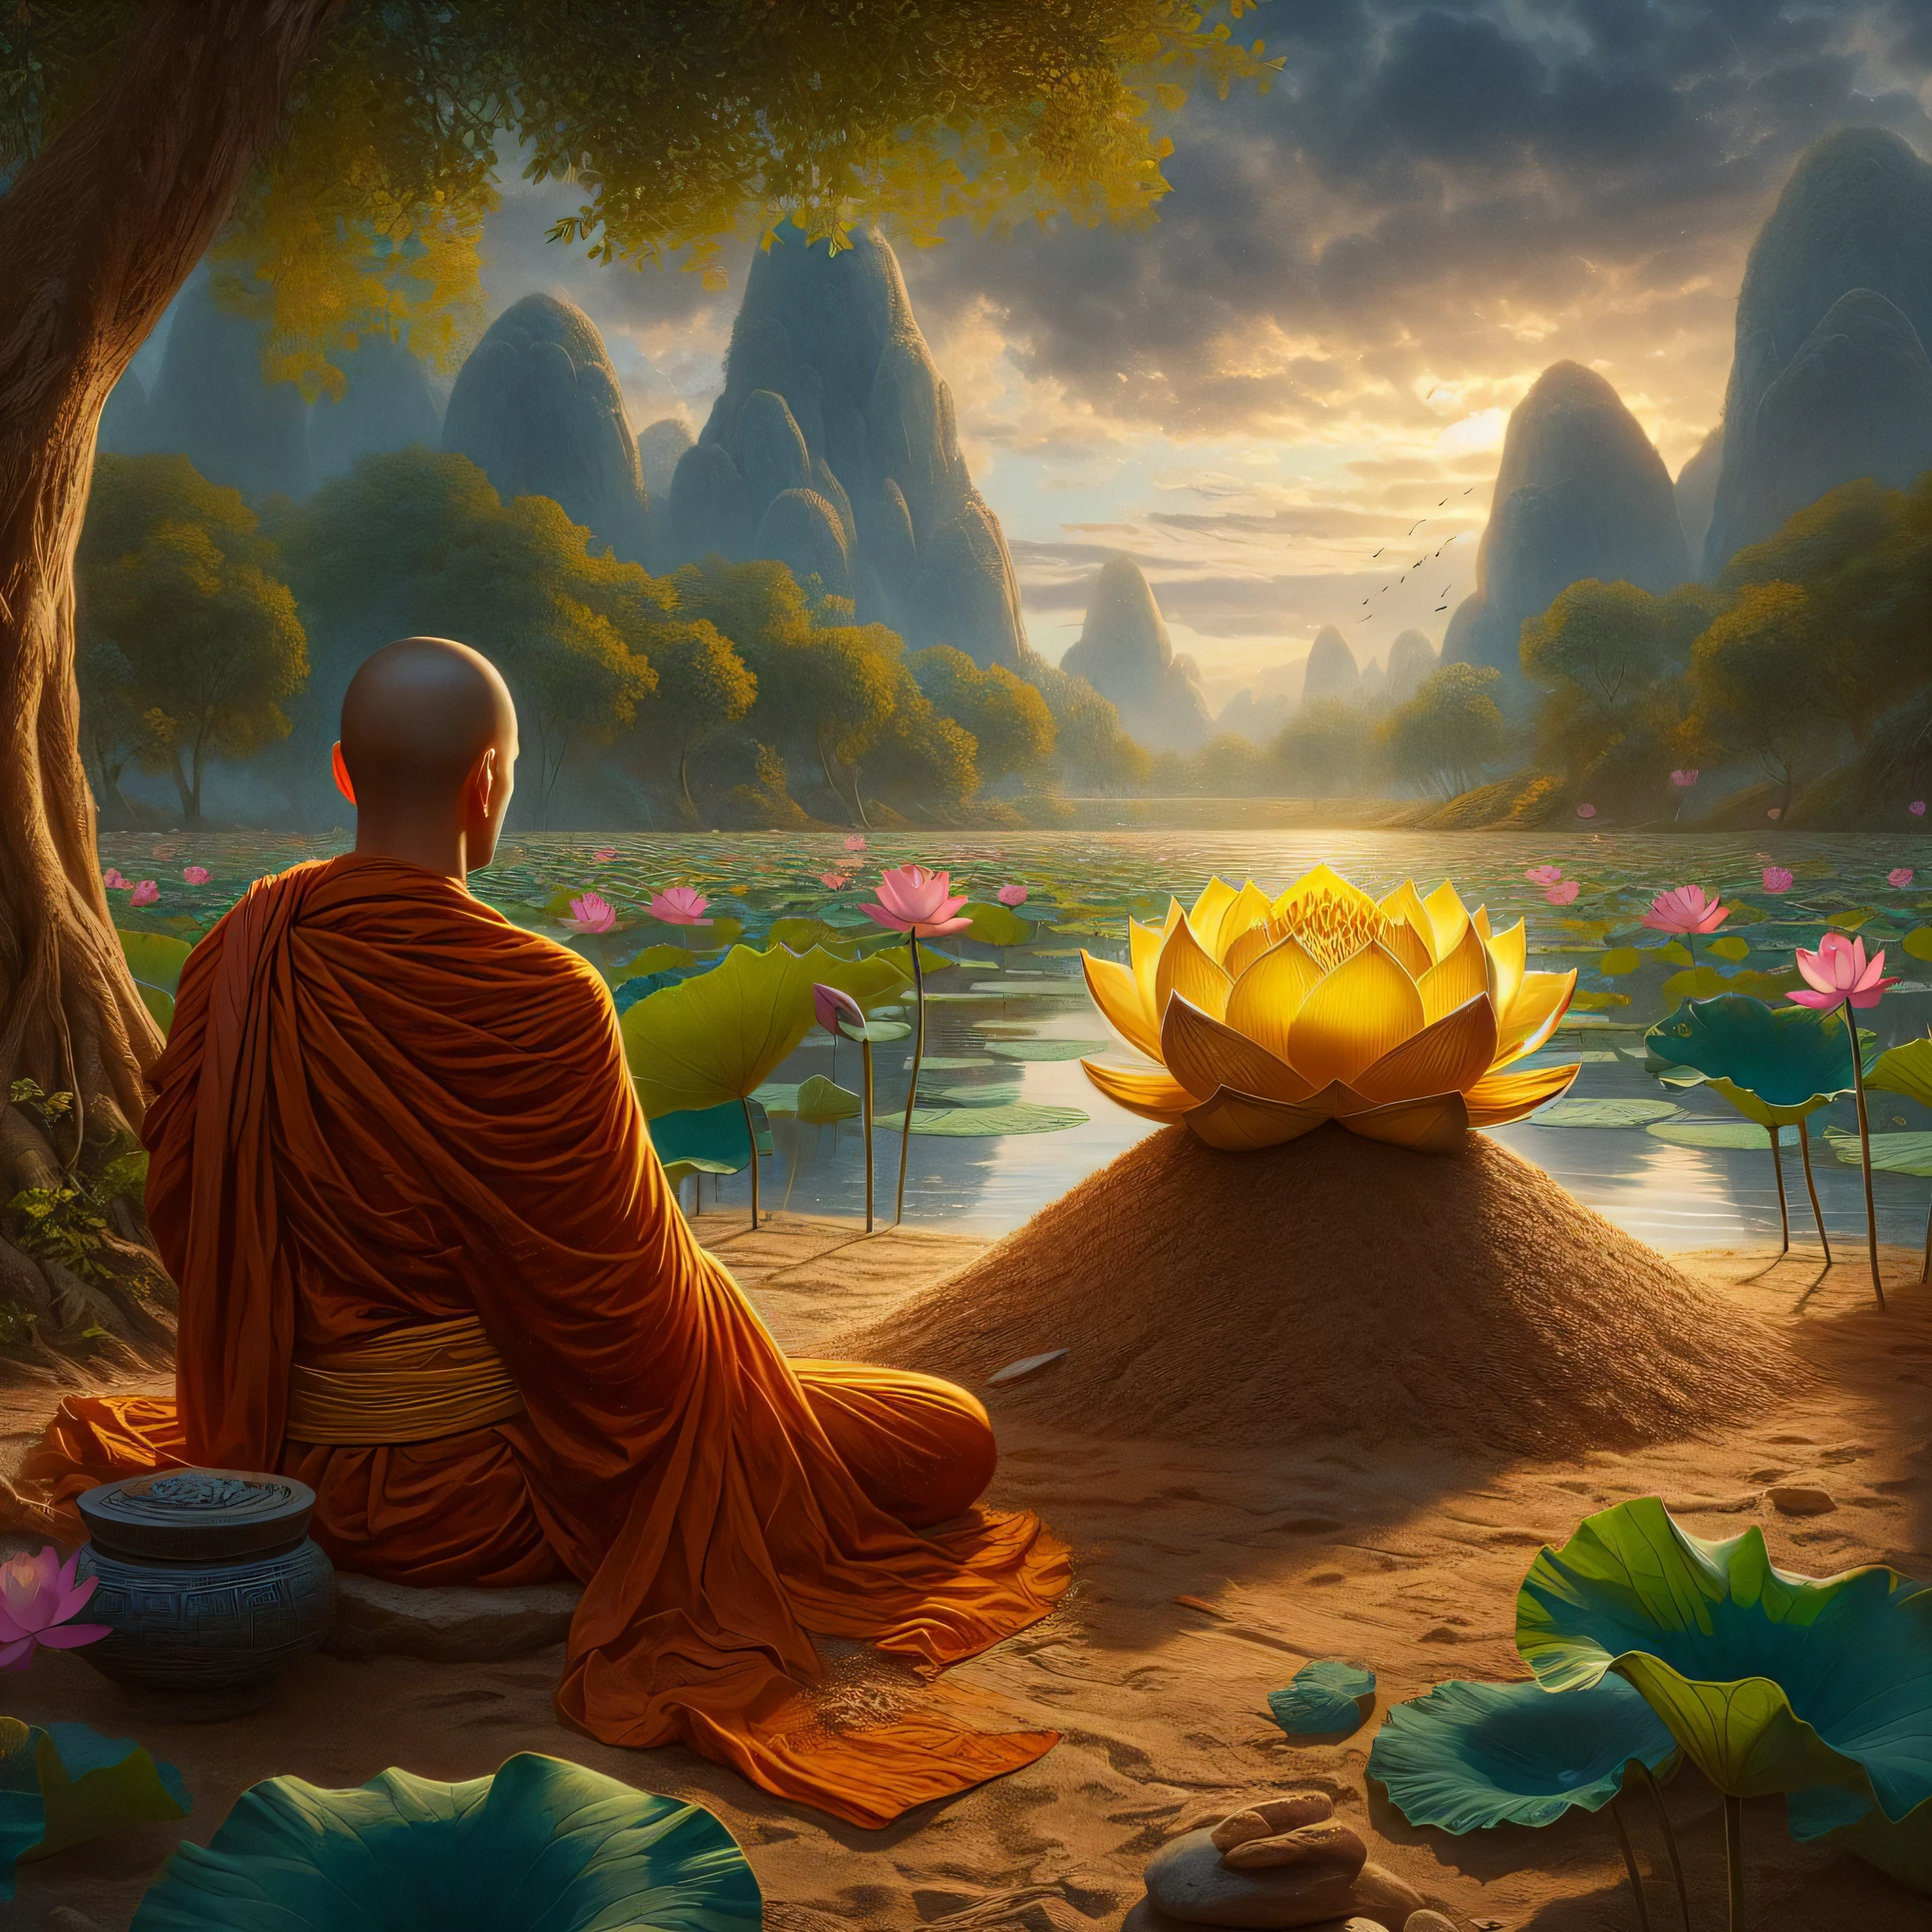 buddha sitting in front of a lake with lotus flowers, sitting on a lotus flower, monk meditate, buddhist monk meditating, standing gracefully upon a lotus, floating in a powerful zen state, on path to enlightenment, zen meditation, on the path to enlightenment, meditating, lotus, hindu stages of meditation, standing on a lotus, meditation, buddhism, buddhist